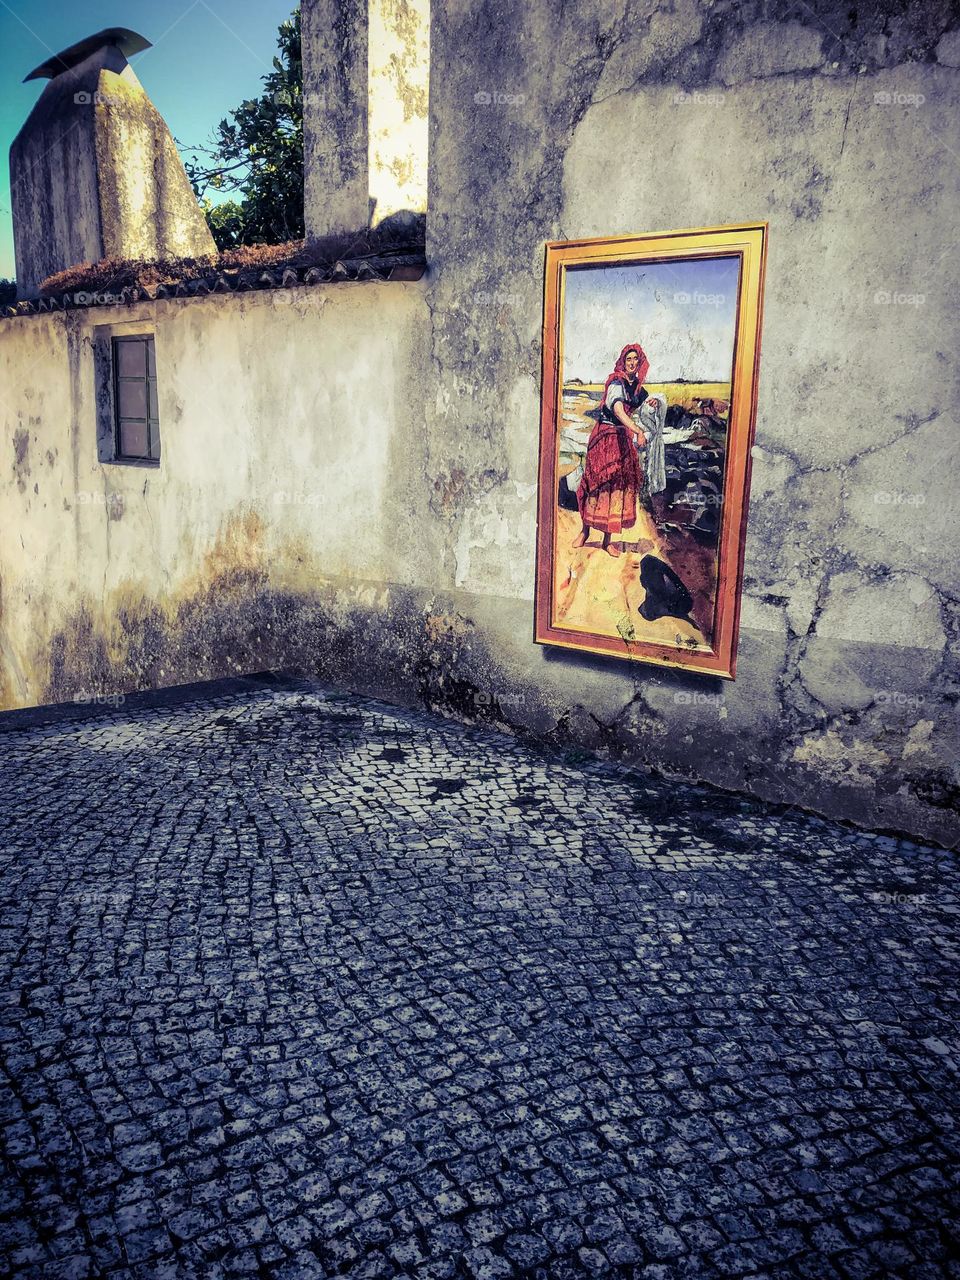 A mural, including a painted on frame on a wall in Figueiró Dos Vinhos, Portugal as part of an annual street art exhibition. It is a recreation of  "José Malhoa. Clara, 1903" by Julio Anaya Cabanding 